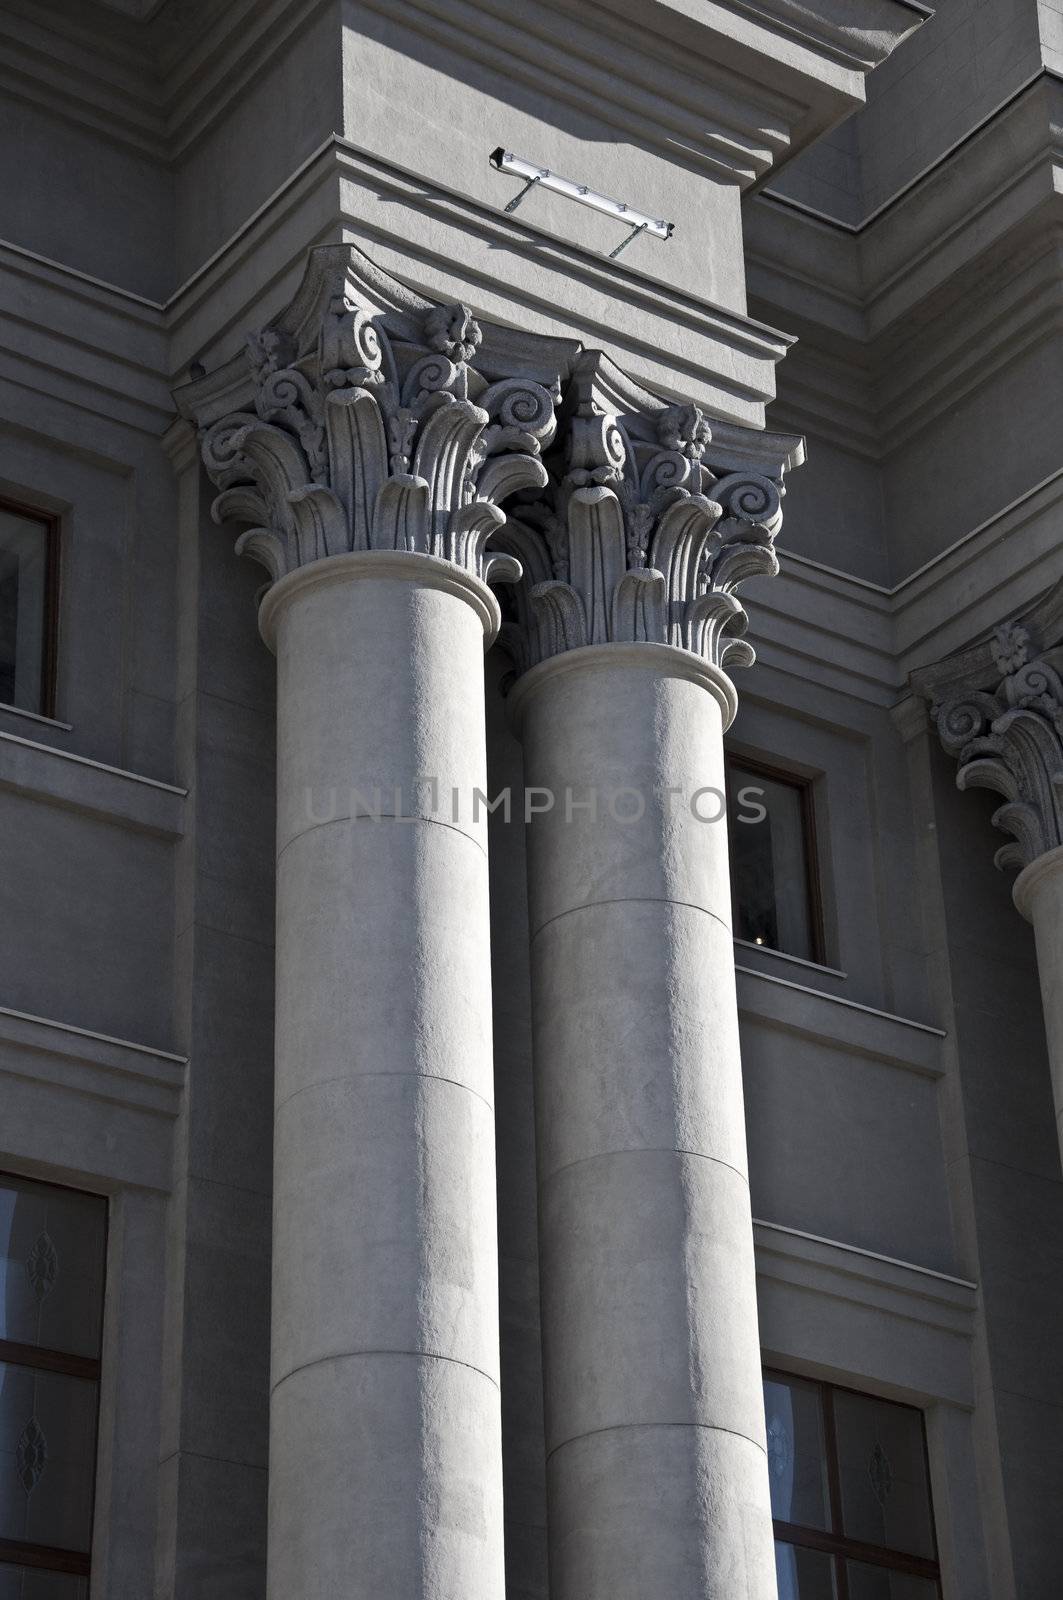 Corinthian order. Classical twin column. Stalinist architecture is classic, a fragment of the facade.